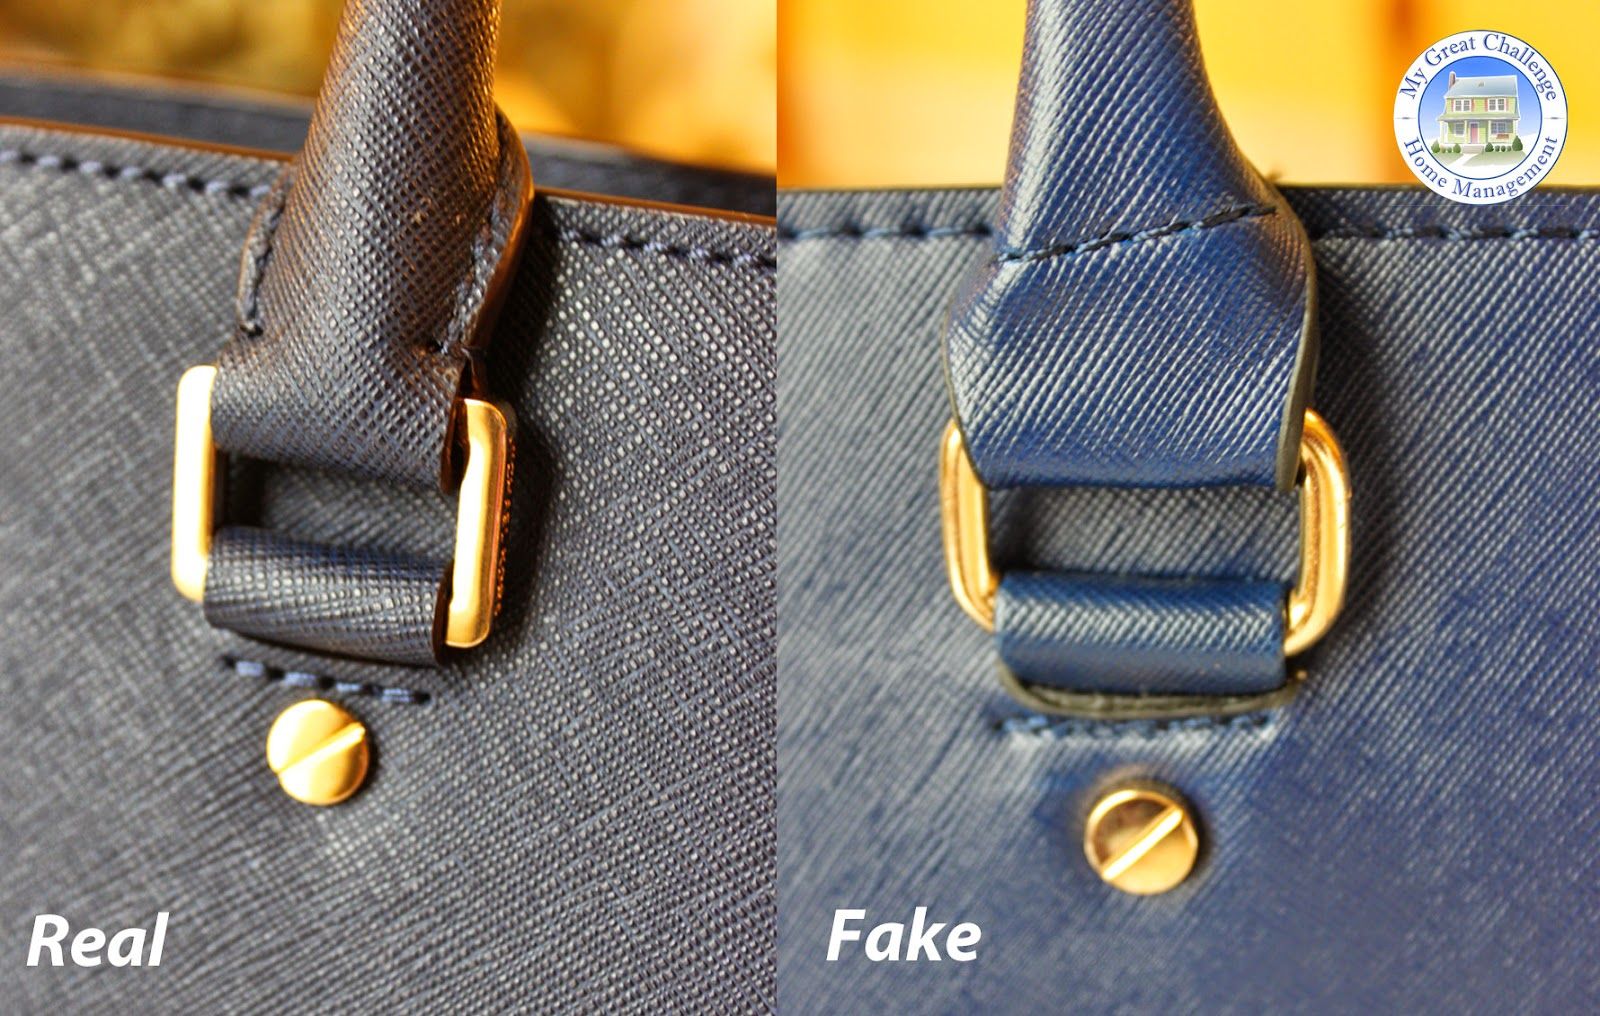 How to Spot an Authentic Michael Kors Purse